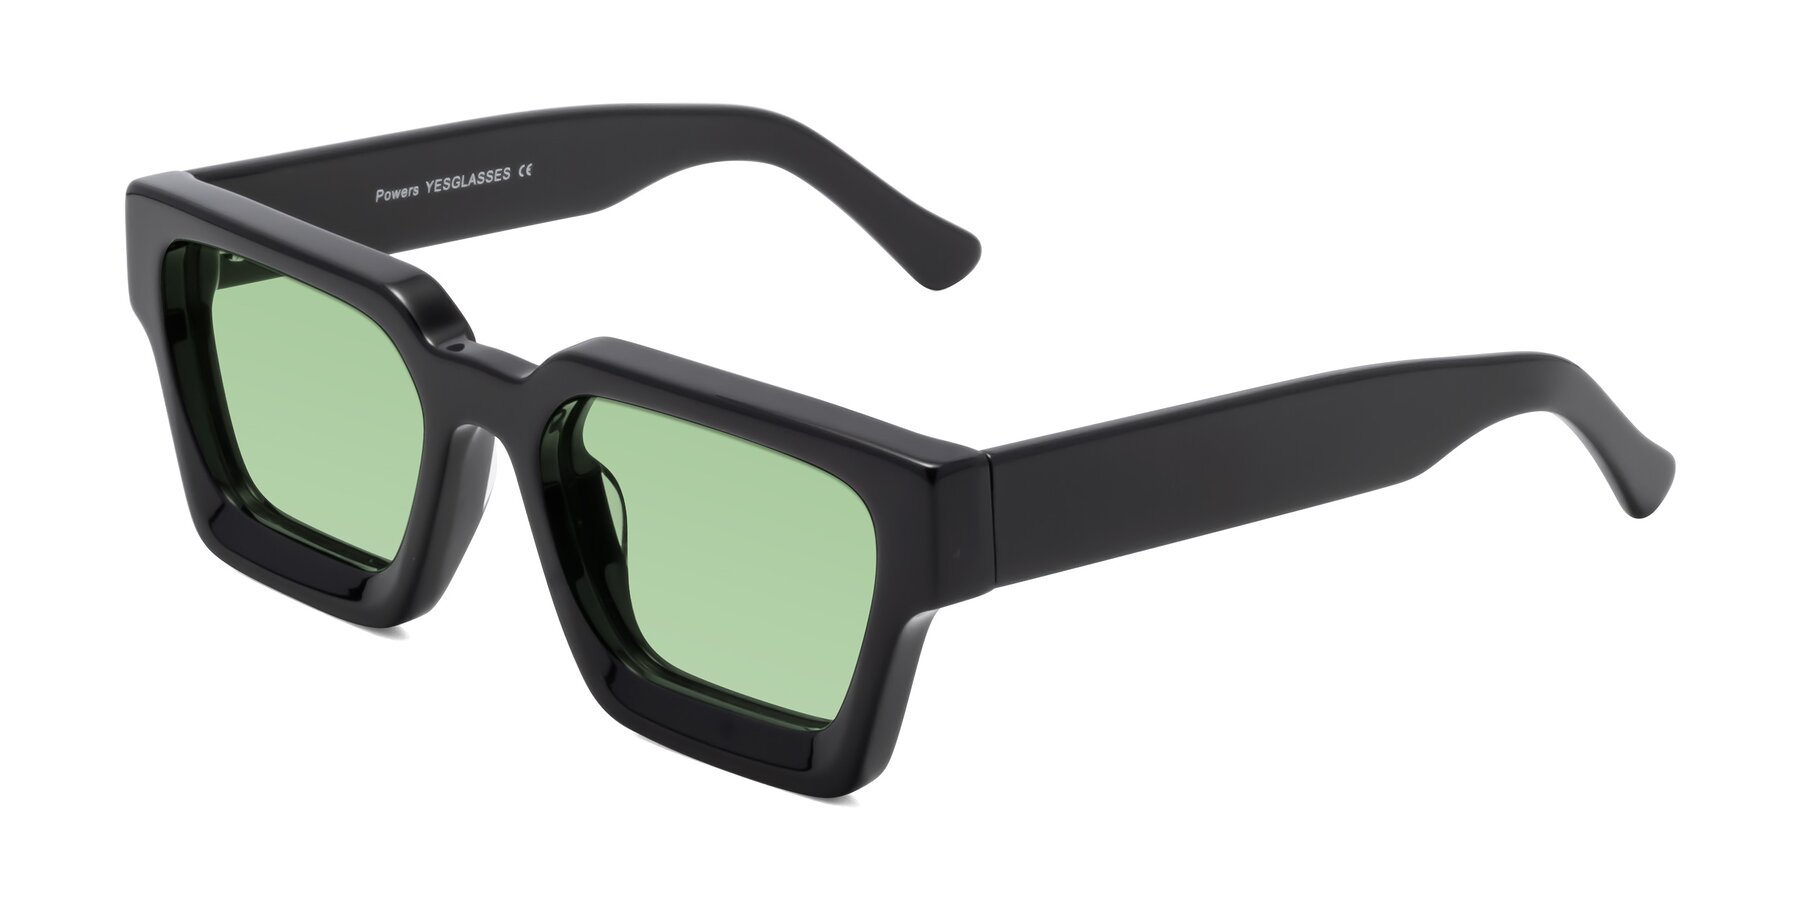 Angle of Powers in Black with Medium Green Tinted Lenses